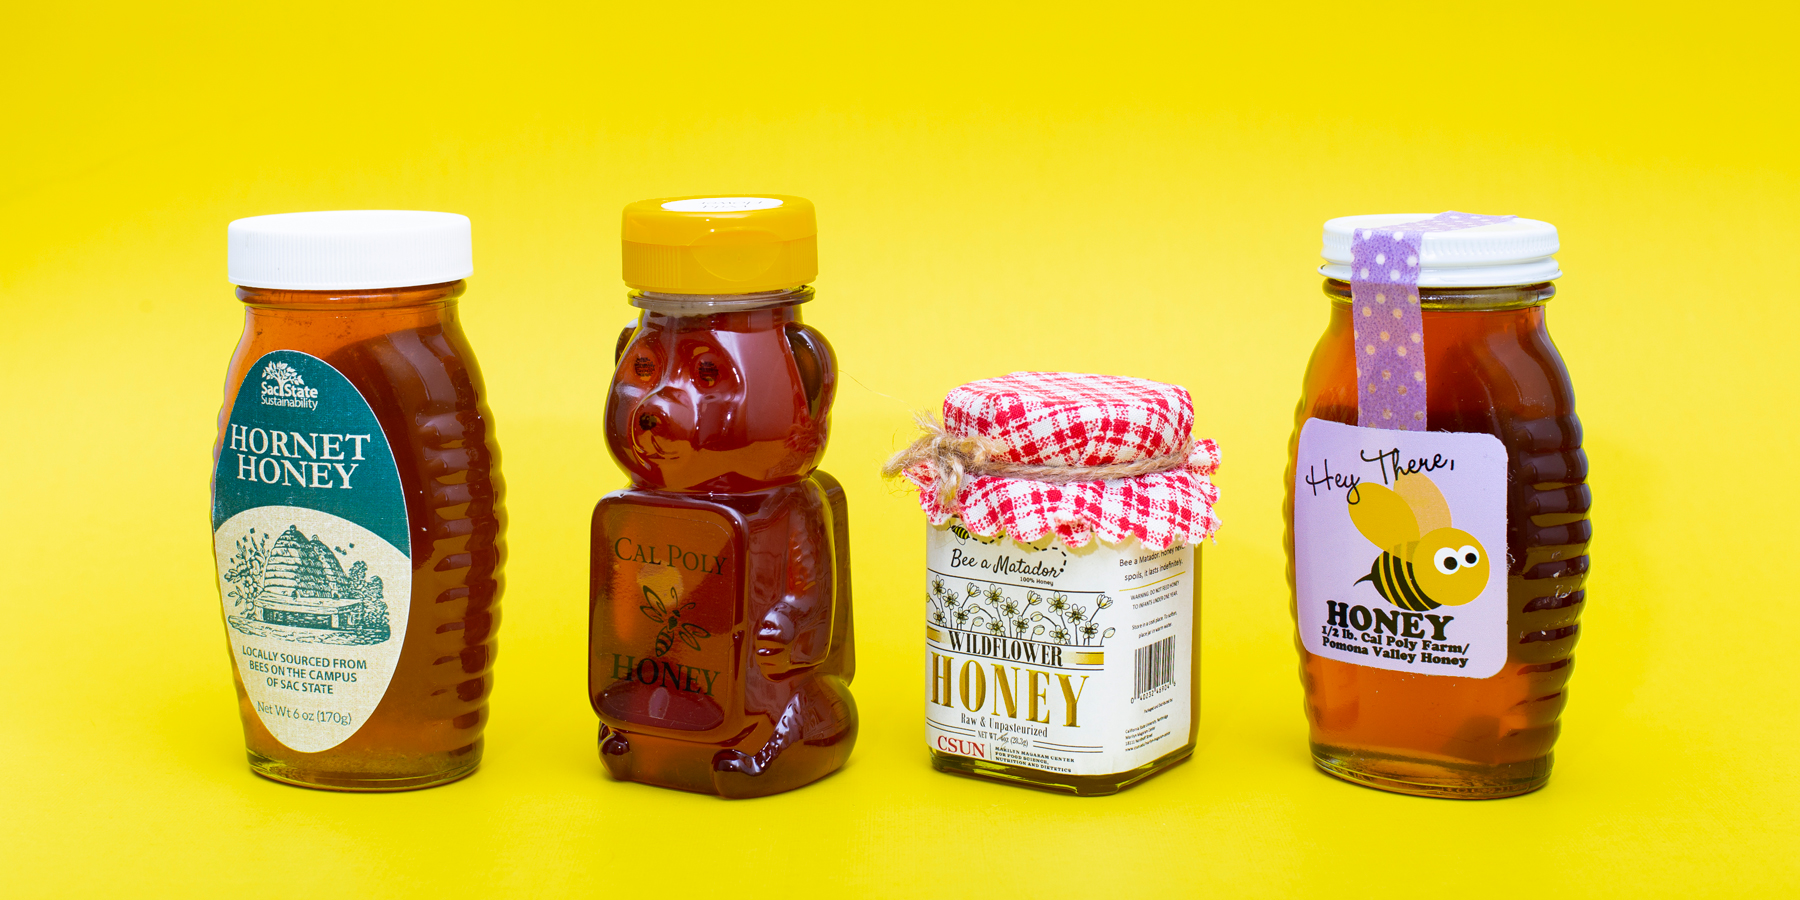 Several CSU campuses make their own honey from on-campus bee hives. From left: Sacramento State's Hornet Honey; Cal Poly San Luis Obispo; CSUN's Bee a Matador Wildflower Honey; and Cal Poly Pomona's Hey There, Honey. (Not pictured: CSU Channel Islands)    